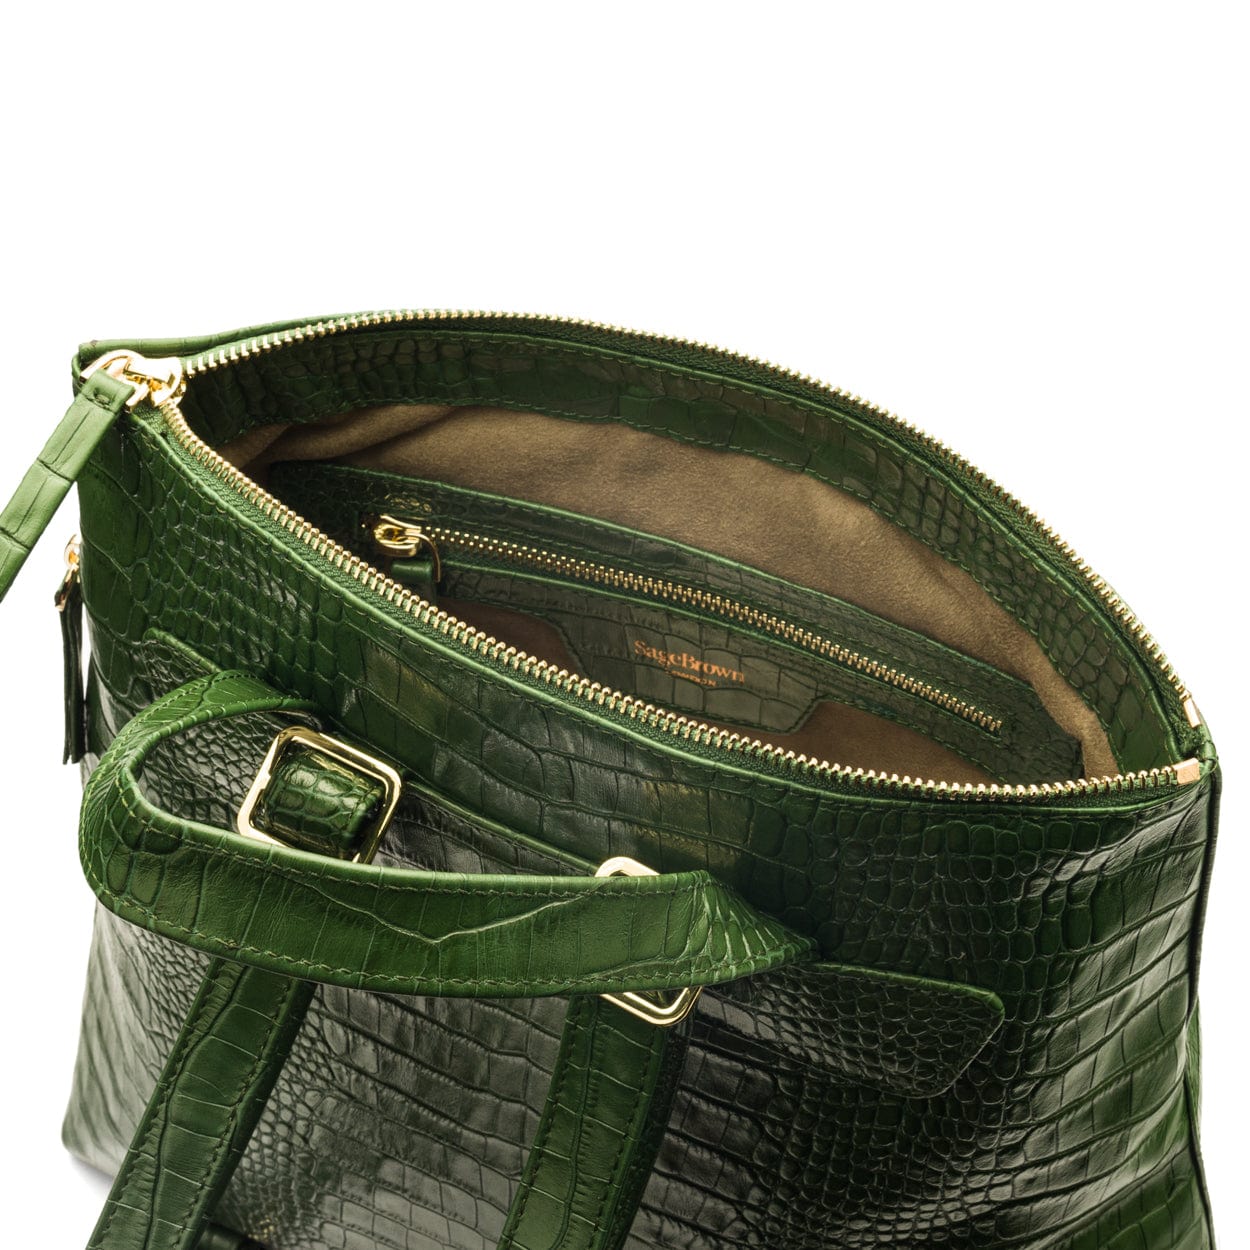 Leather 13" laptop backpack, green croc, open